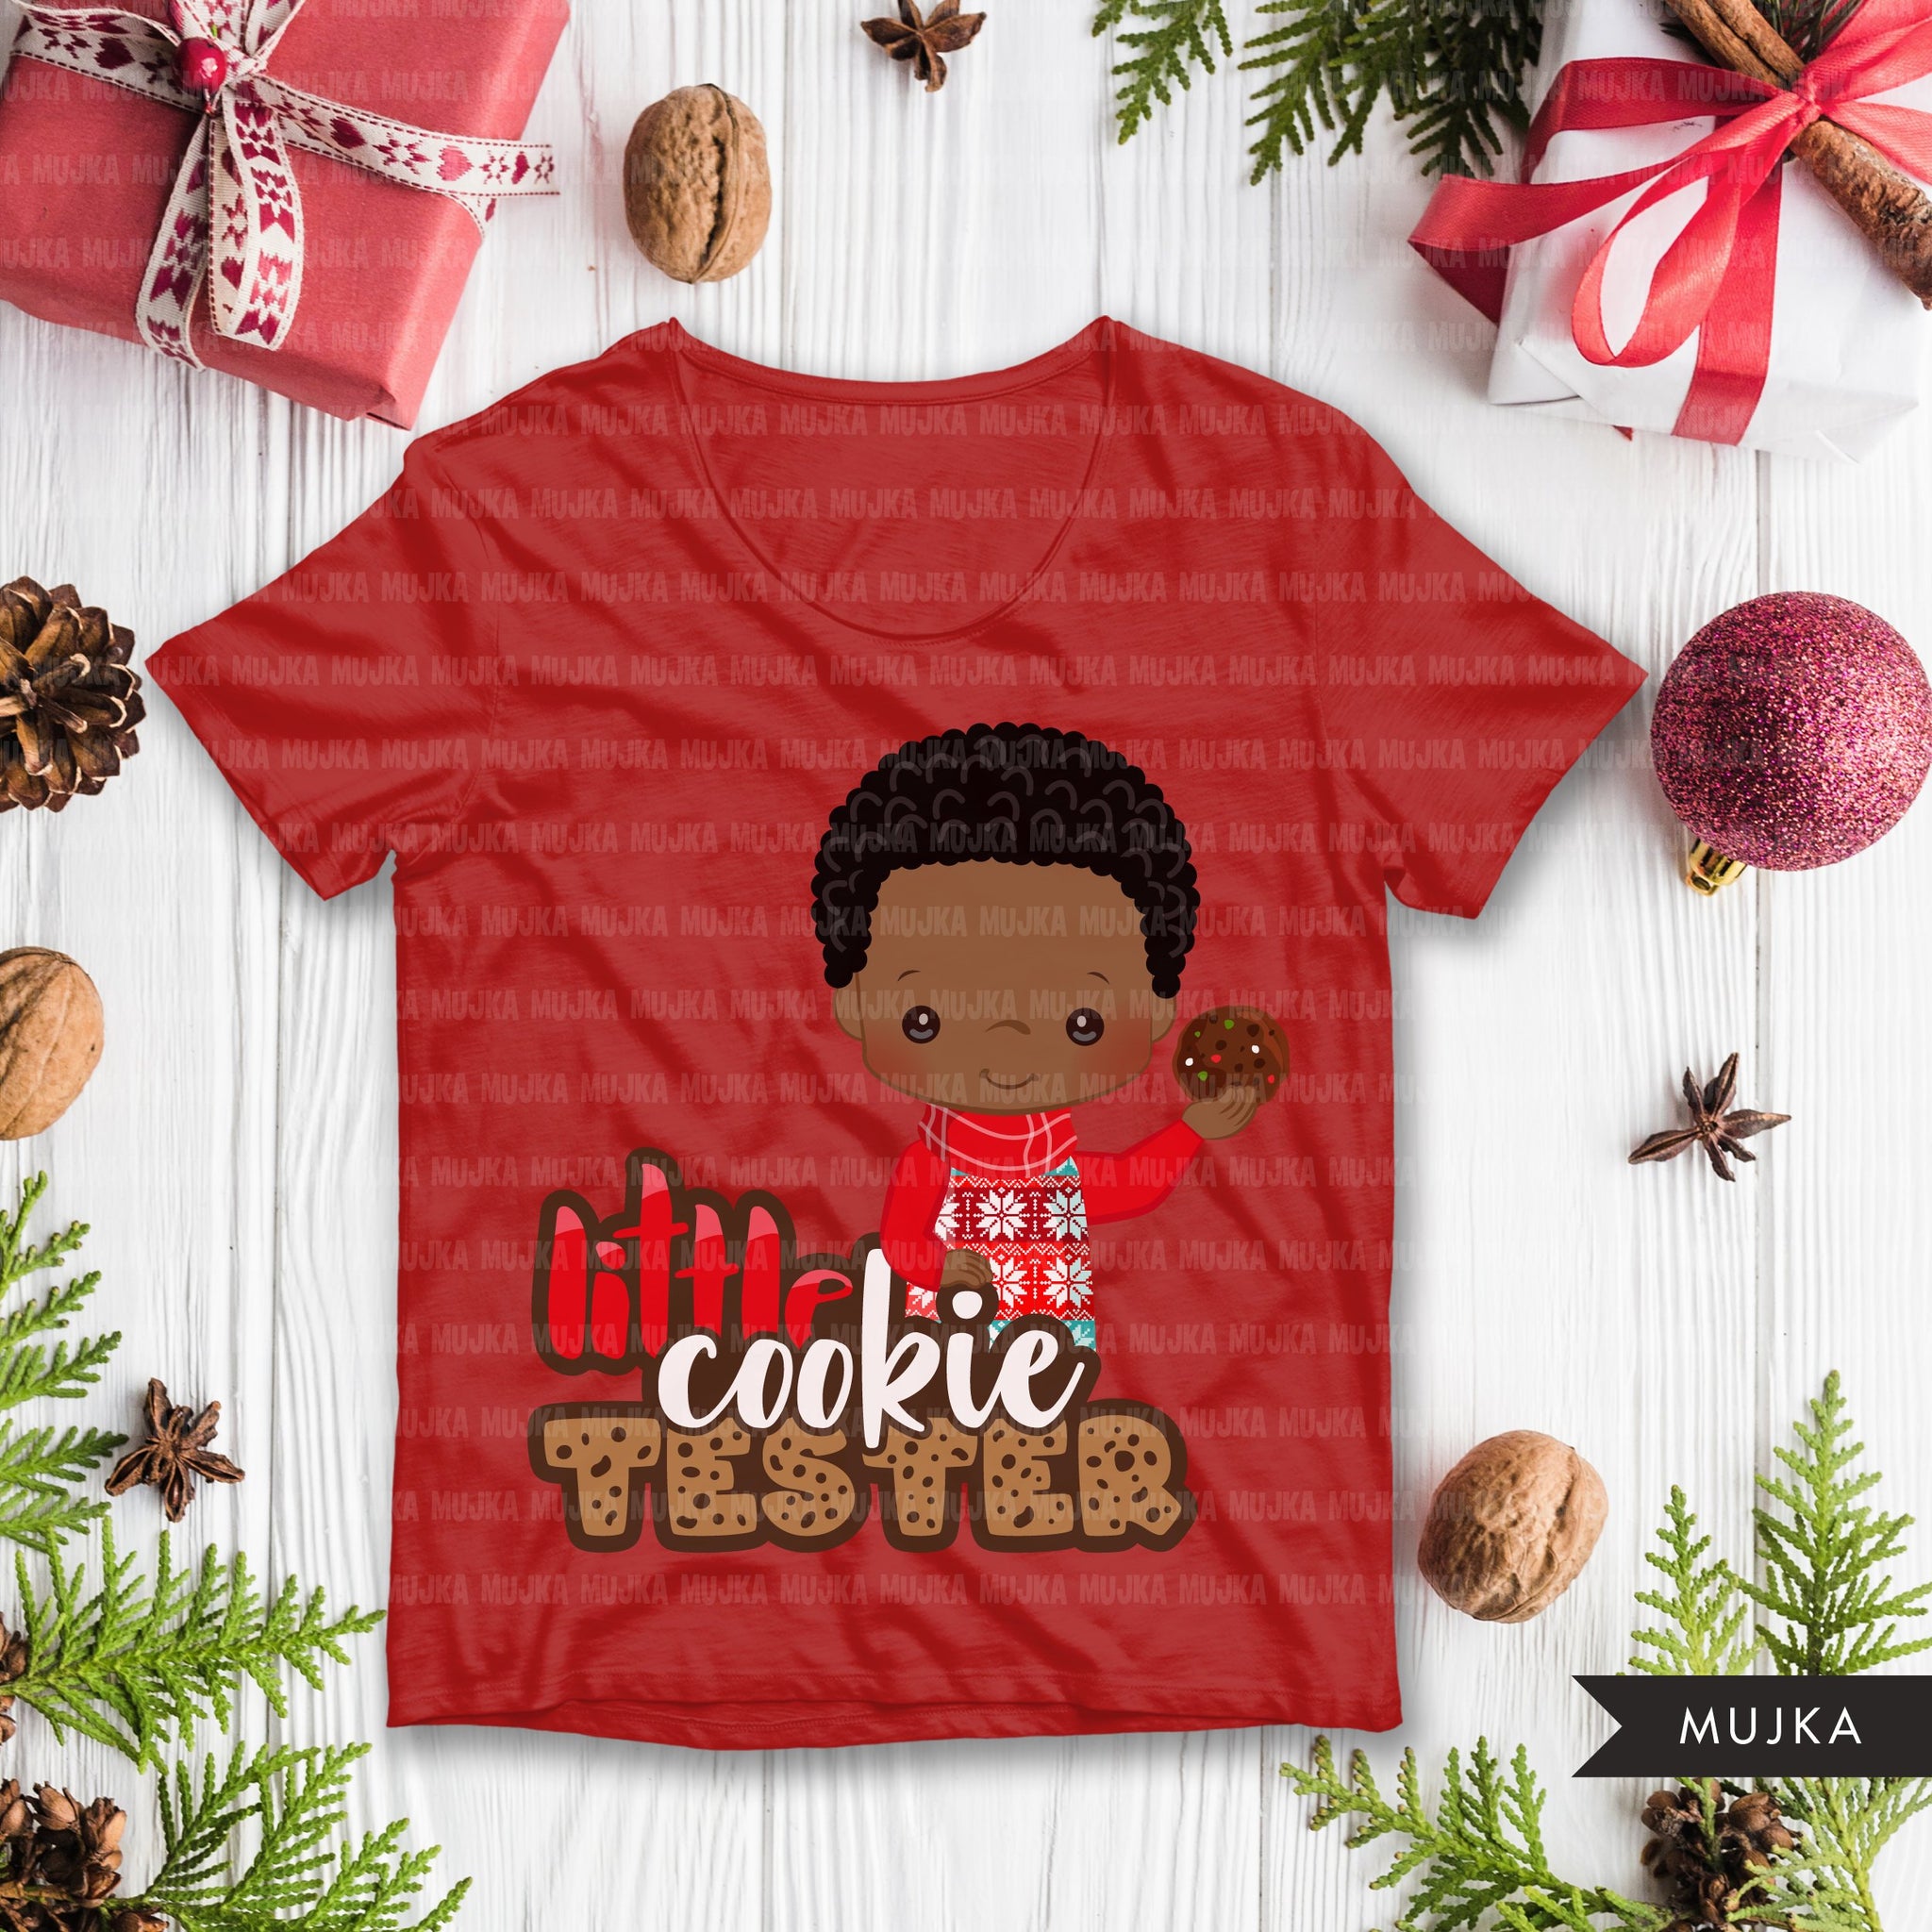 Christmas PNG digital, Little cookie Tester Printable HTV sublimation image transfer clipart, t-shirt Afro black boy graphics